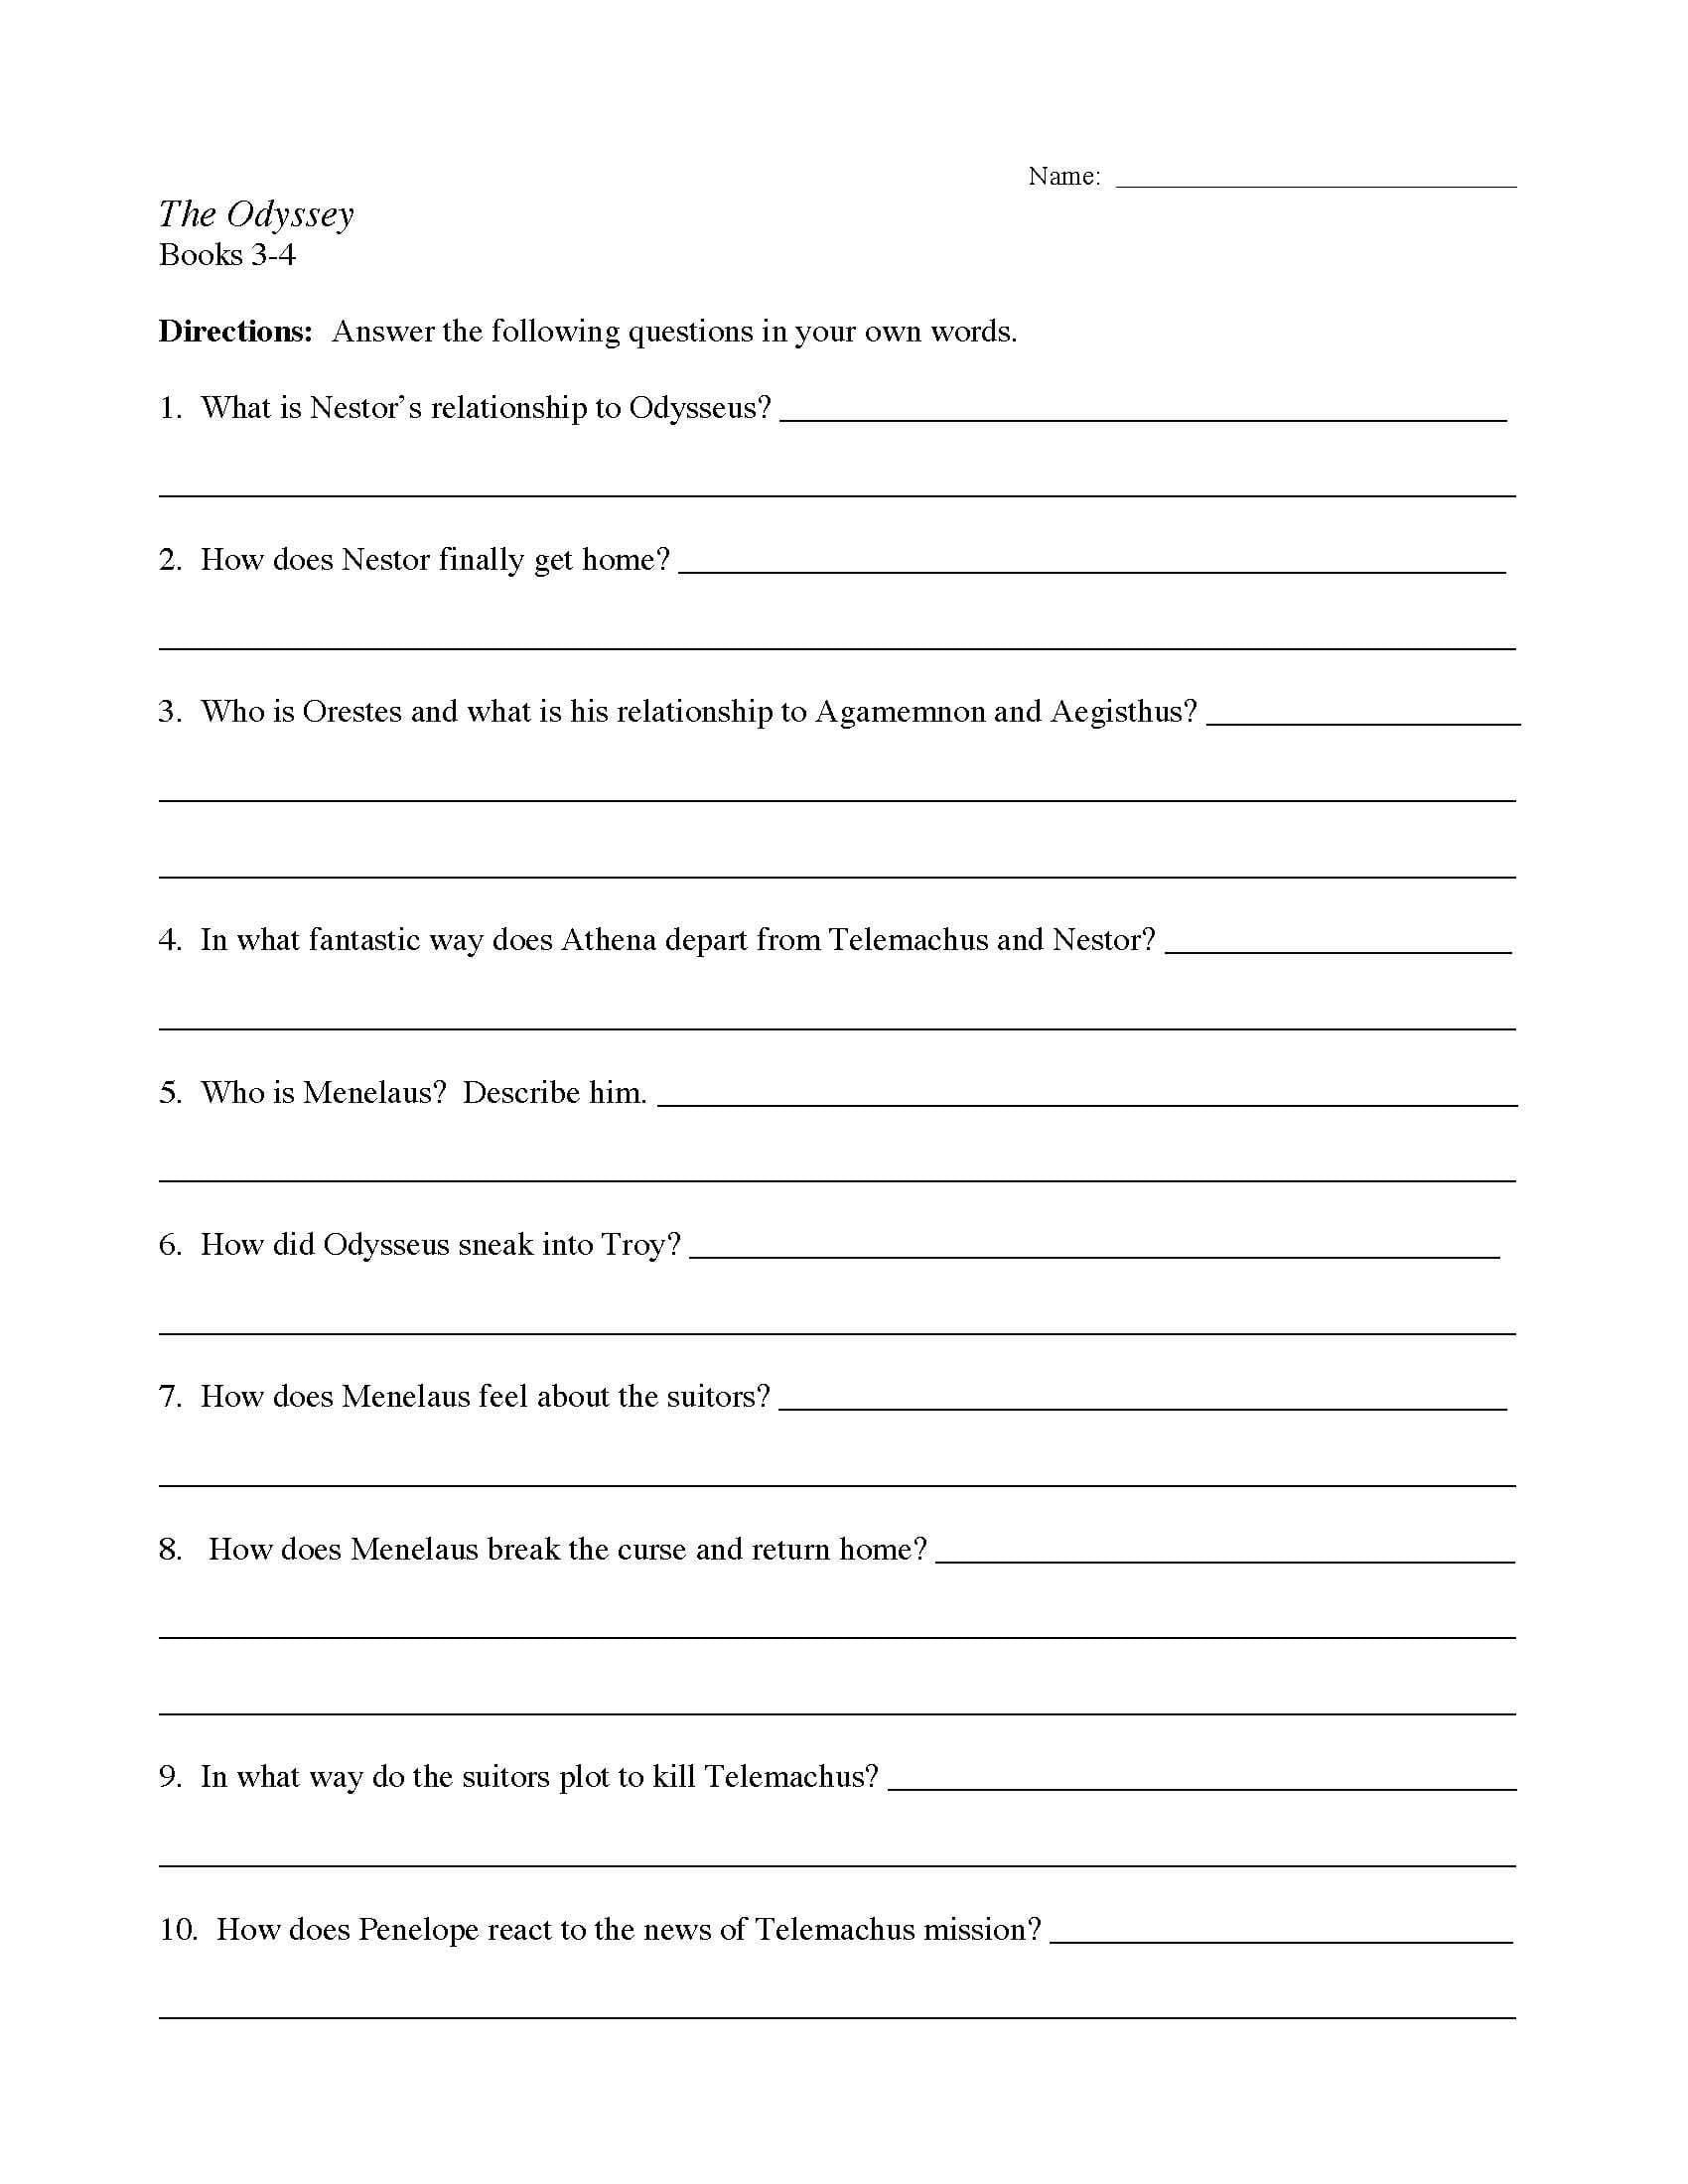 The Odyssey Chapters 34 Worksheet  Preview